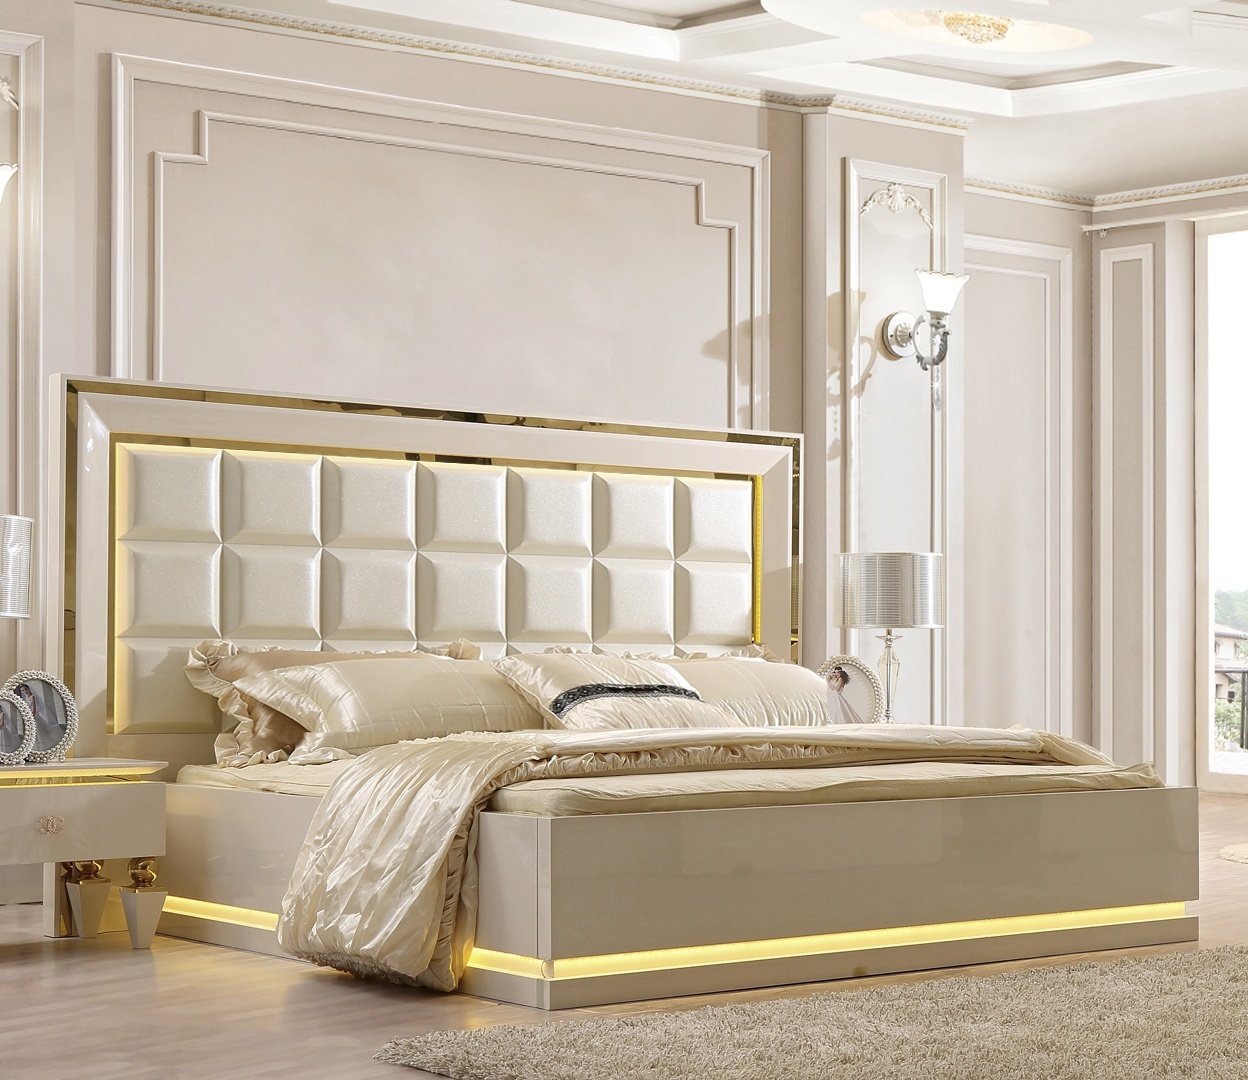 Leather Eastern King Bed in White Gloss Finish EK9935 European Traditional Victorian